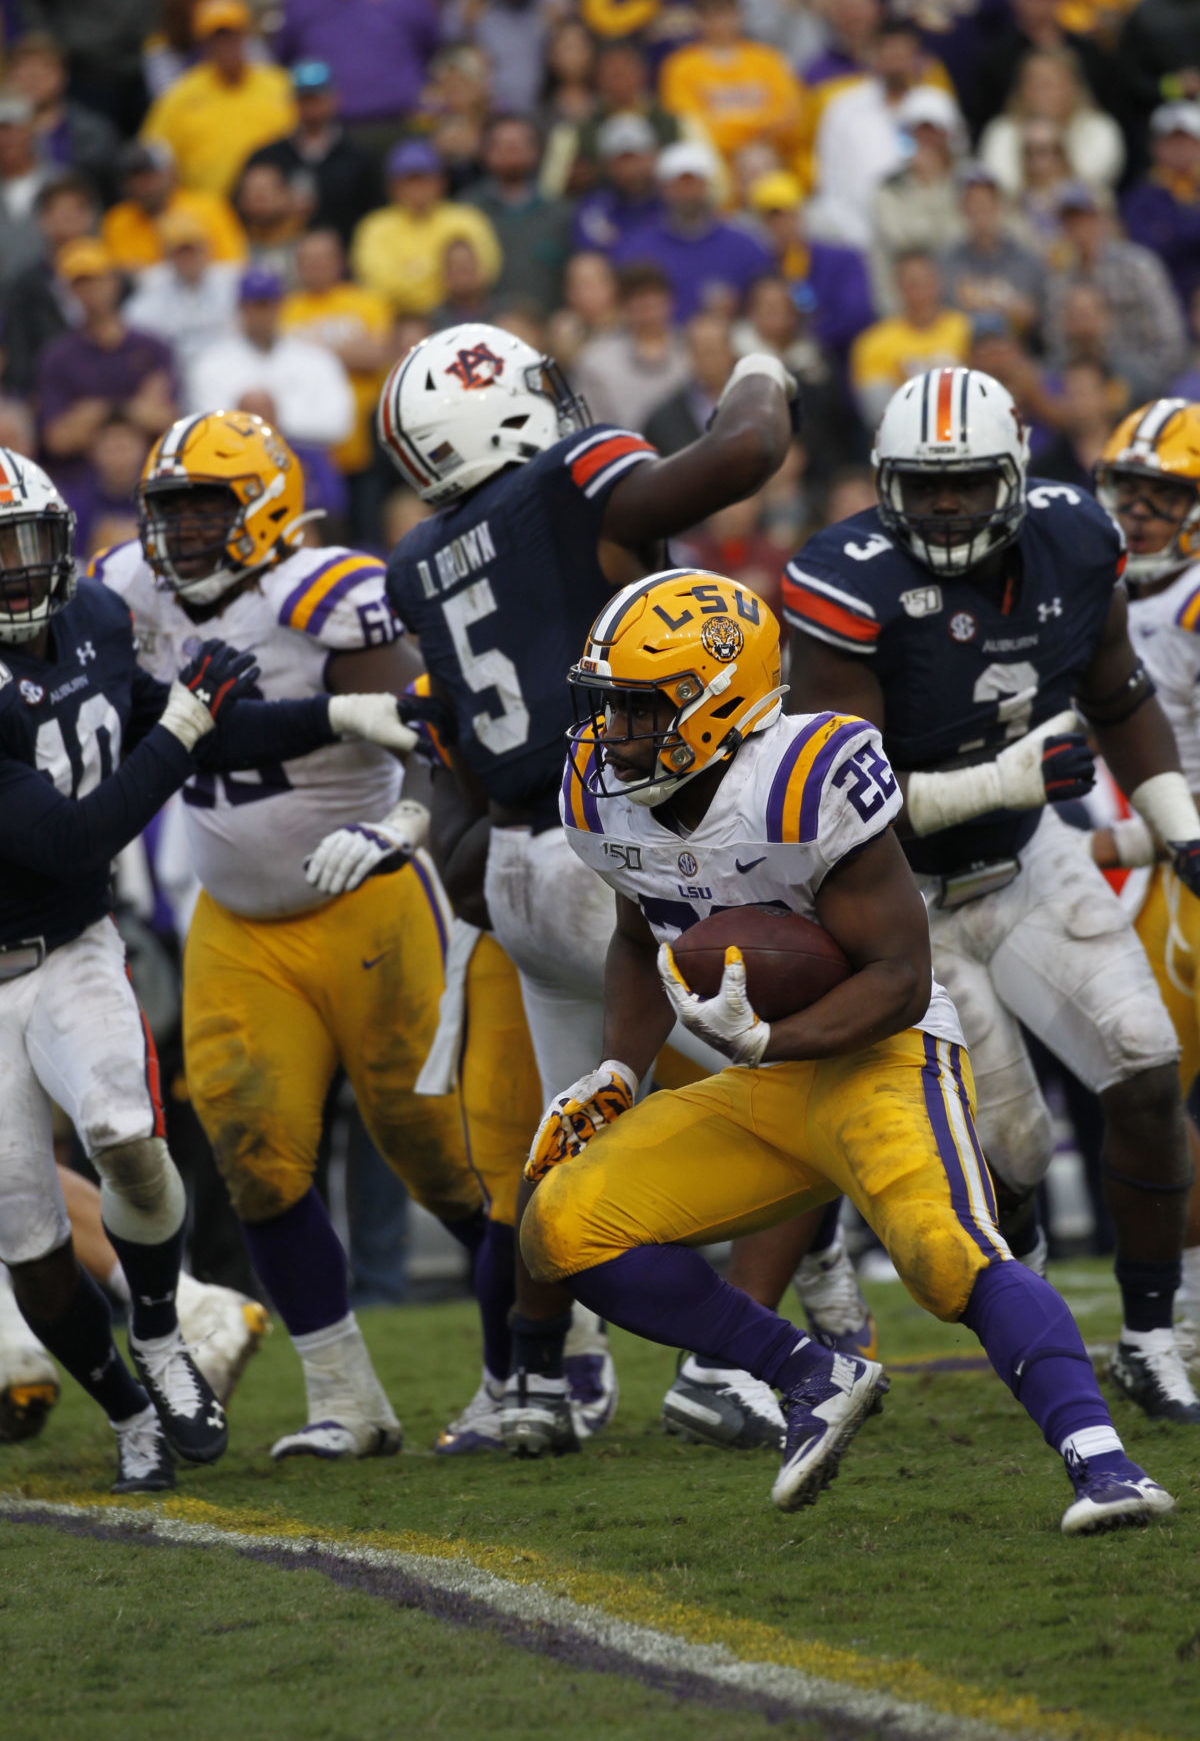 LSU’S EDWARDS-HELAIRE ONE OF 10 SEMIFINALISTS FOR DOAK WALKER AWARD